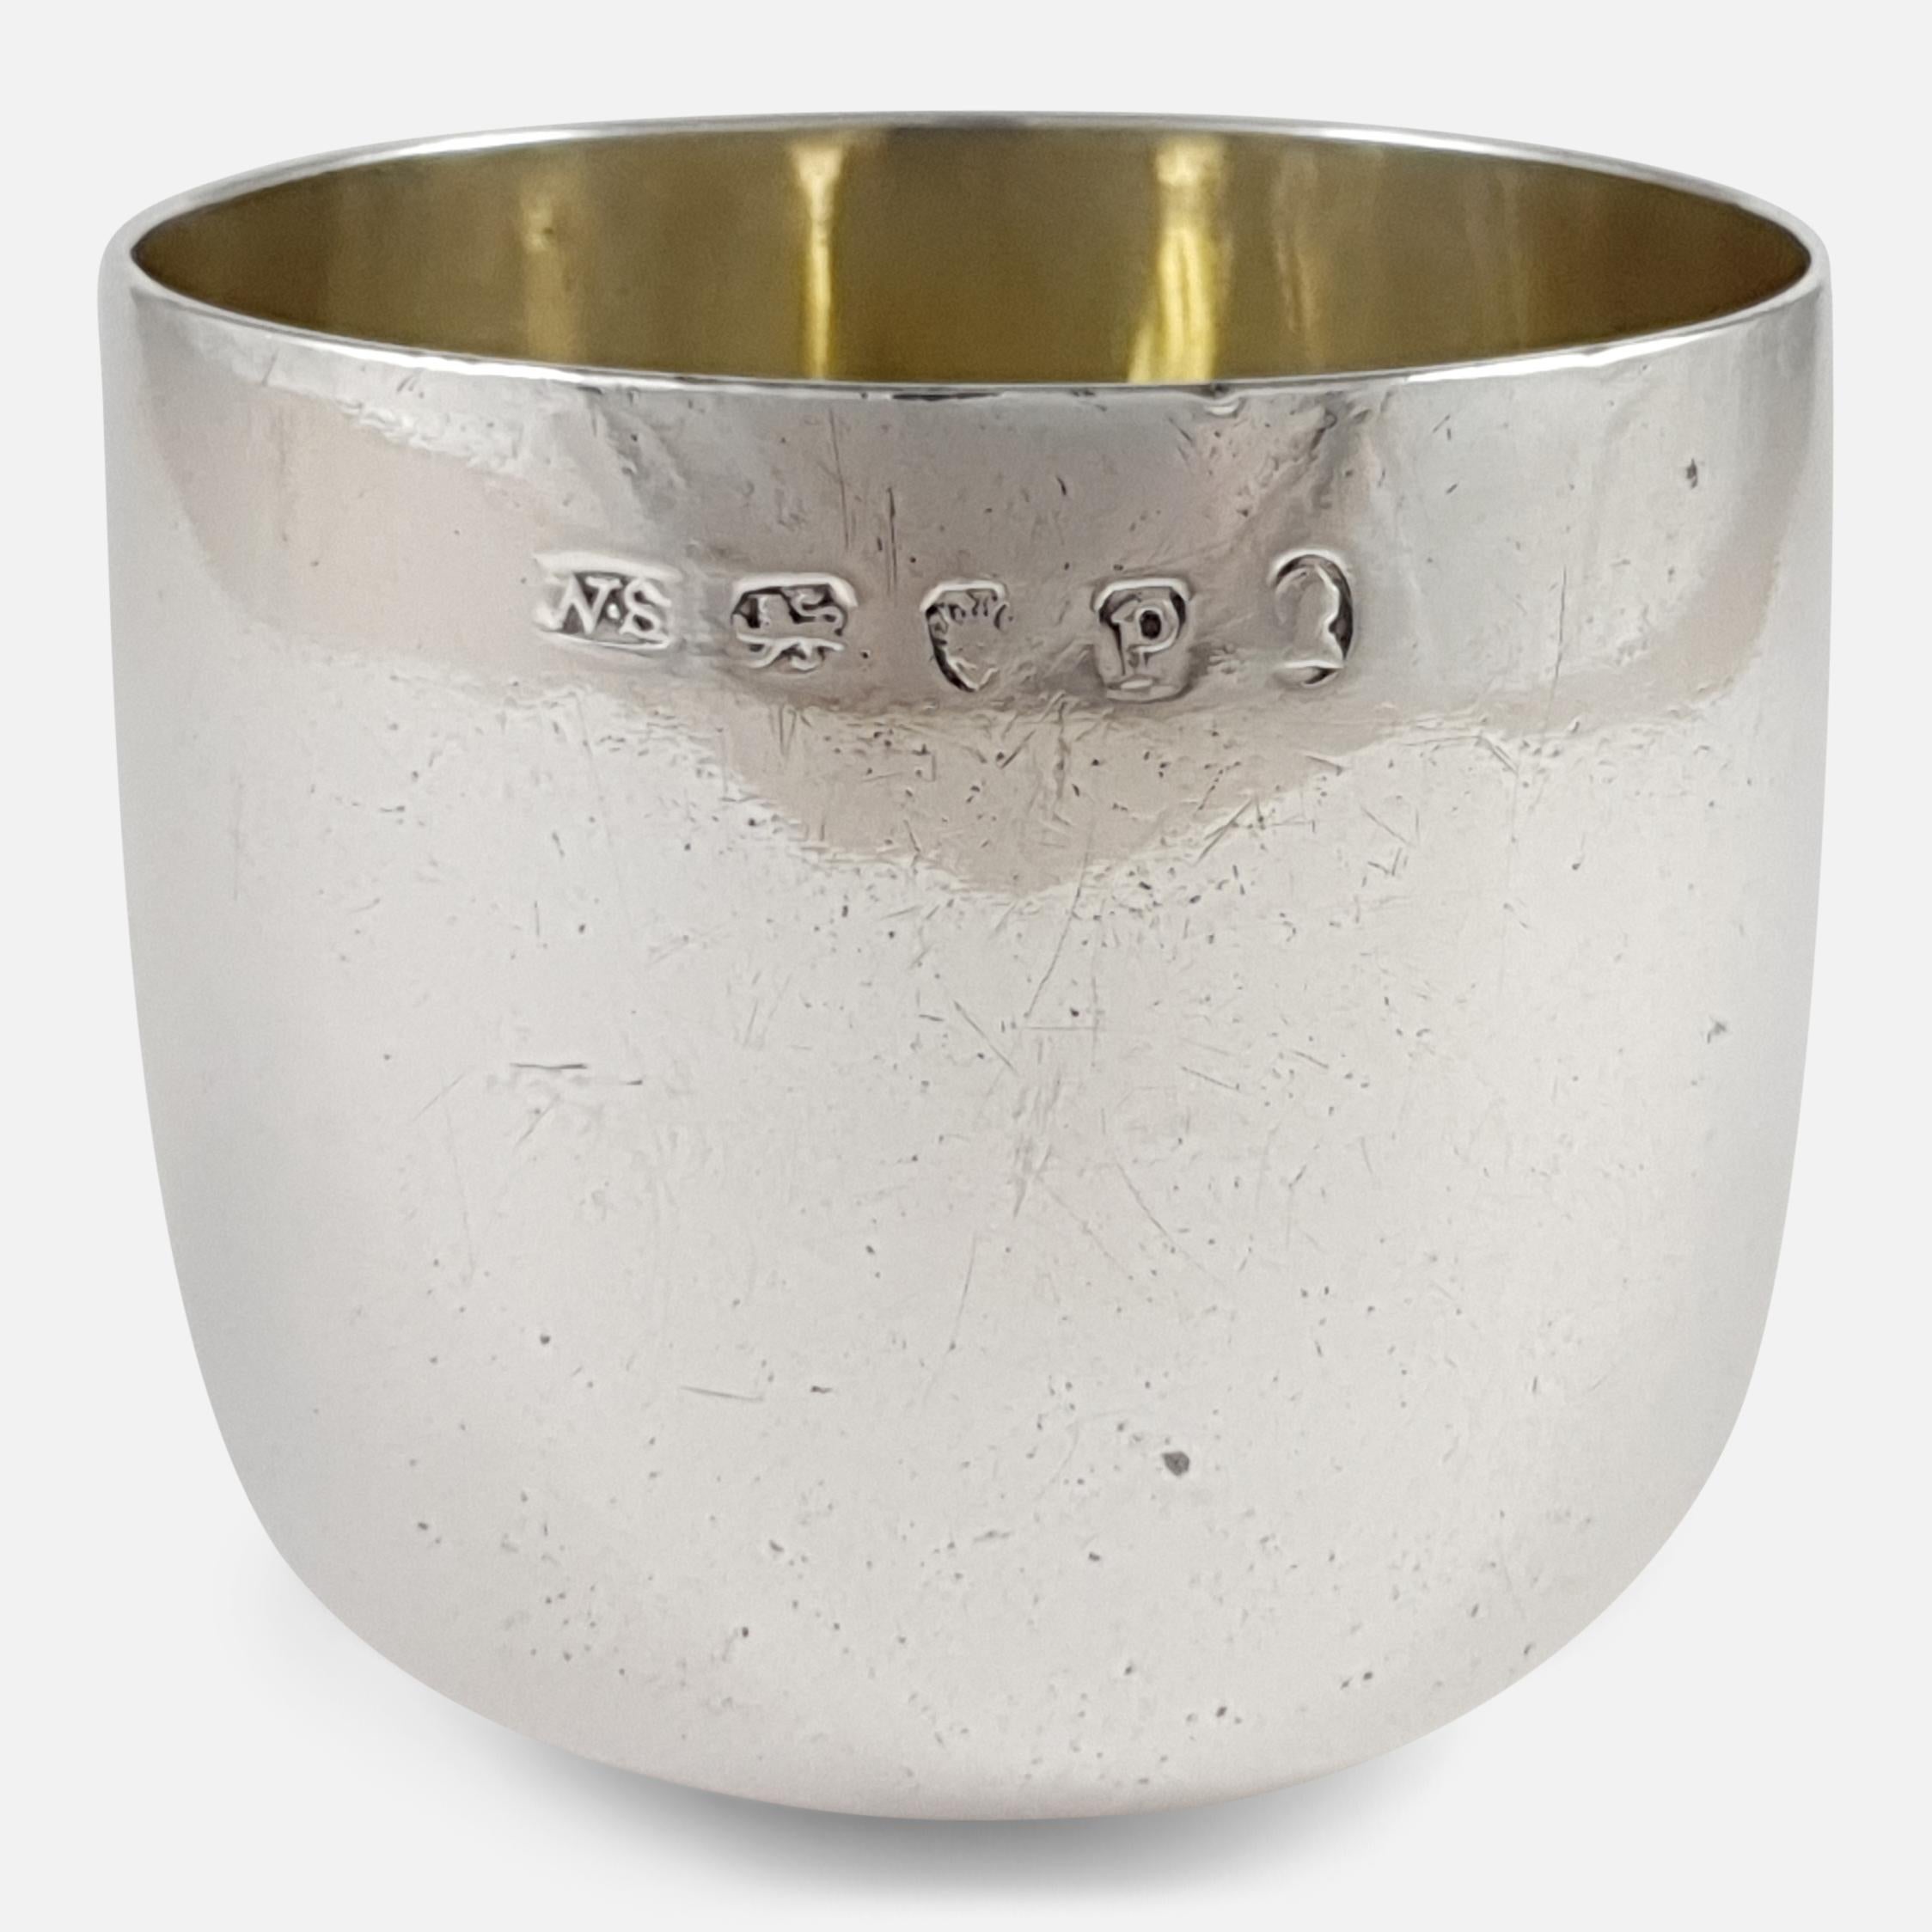 A George III sterling silver tumbler cup by William Stephenson, London 1790. The tumbler is made from a good gauge of silver, is in fine antique condition, has a good overall patina, and sits on a domed base. The tumbler is hallmarked with the